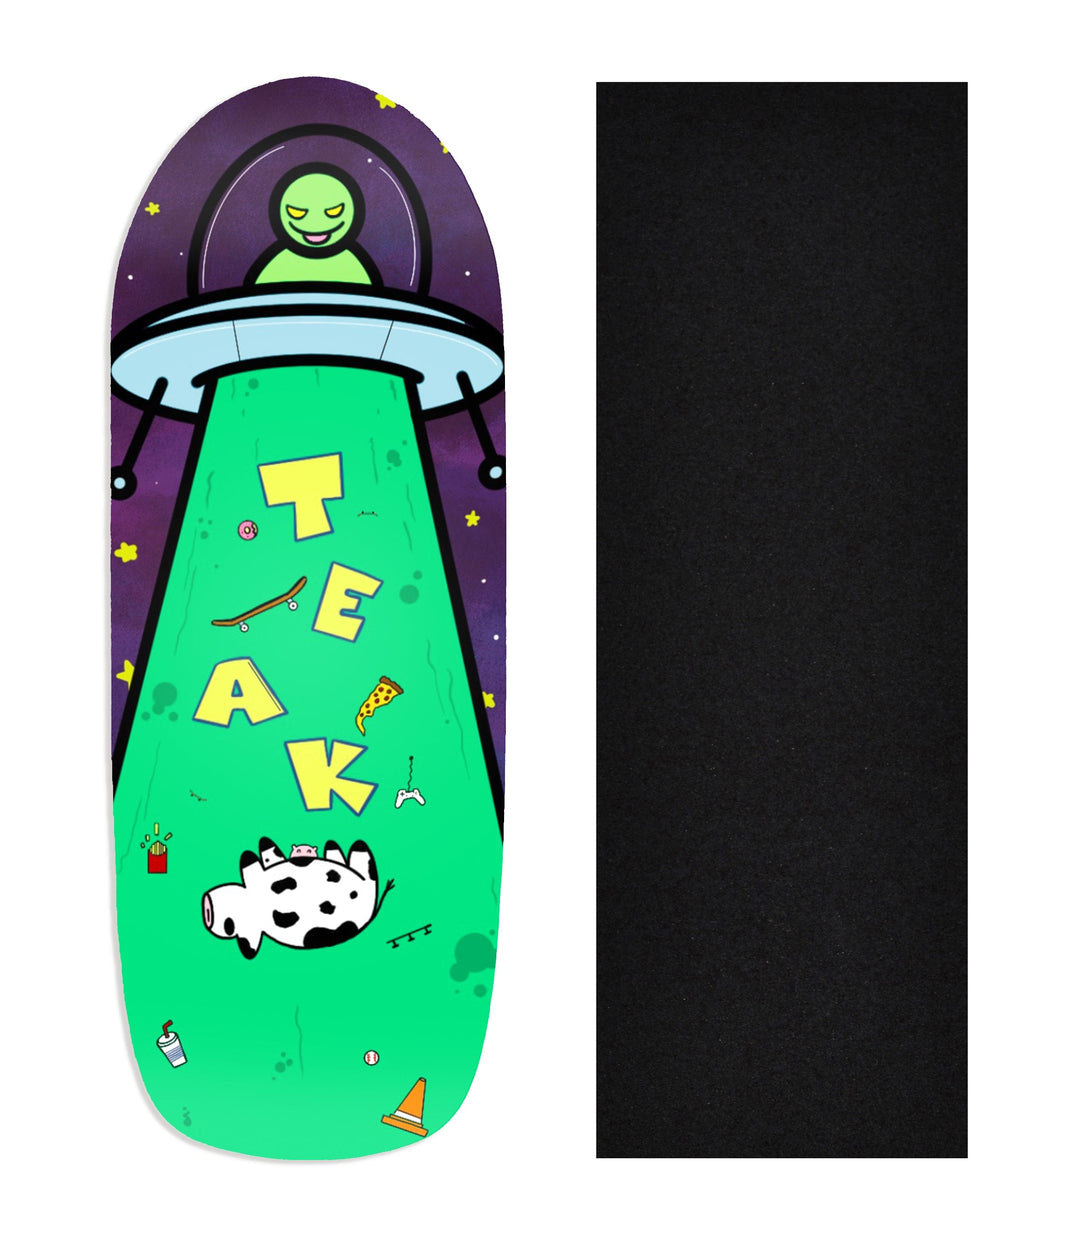 Teak Tuning Heat Transfer Graphic Wooden Fingerboard Deck, @plaguefingers - Entry#83 Poolparty Deck